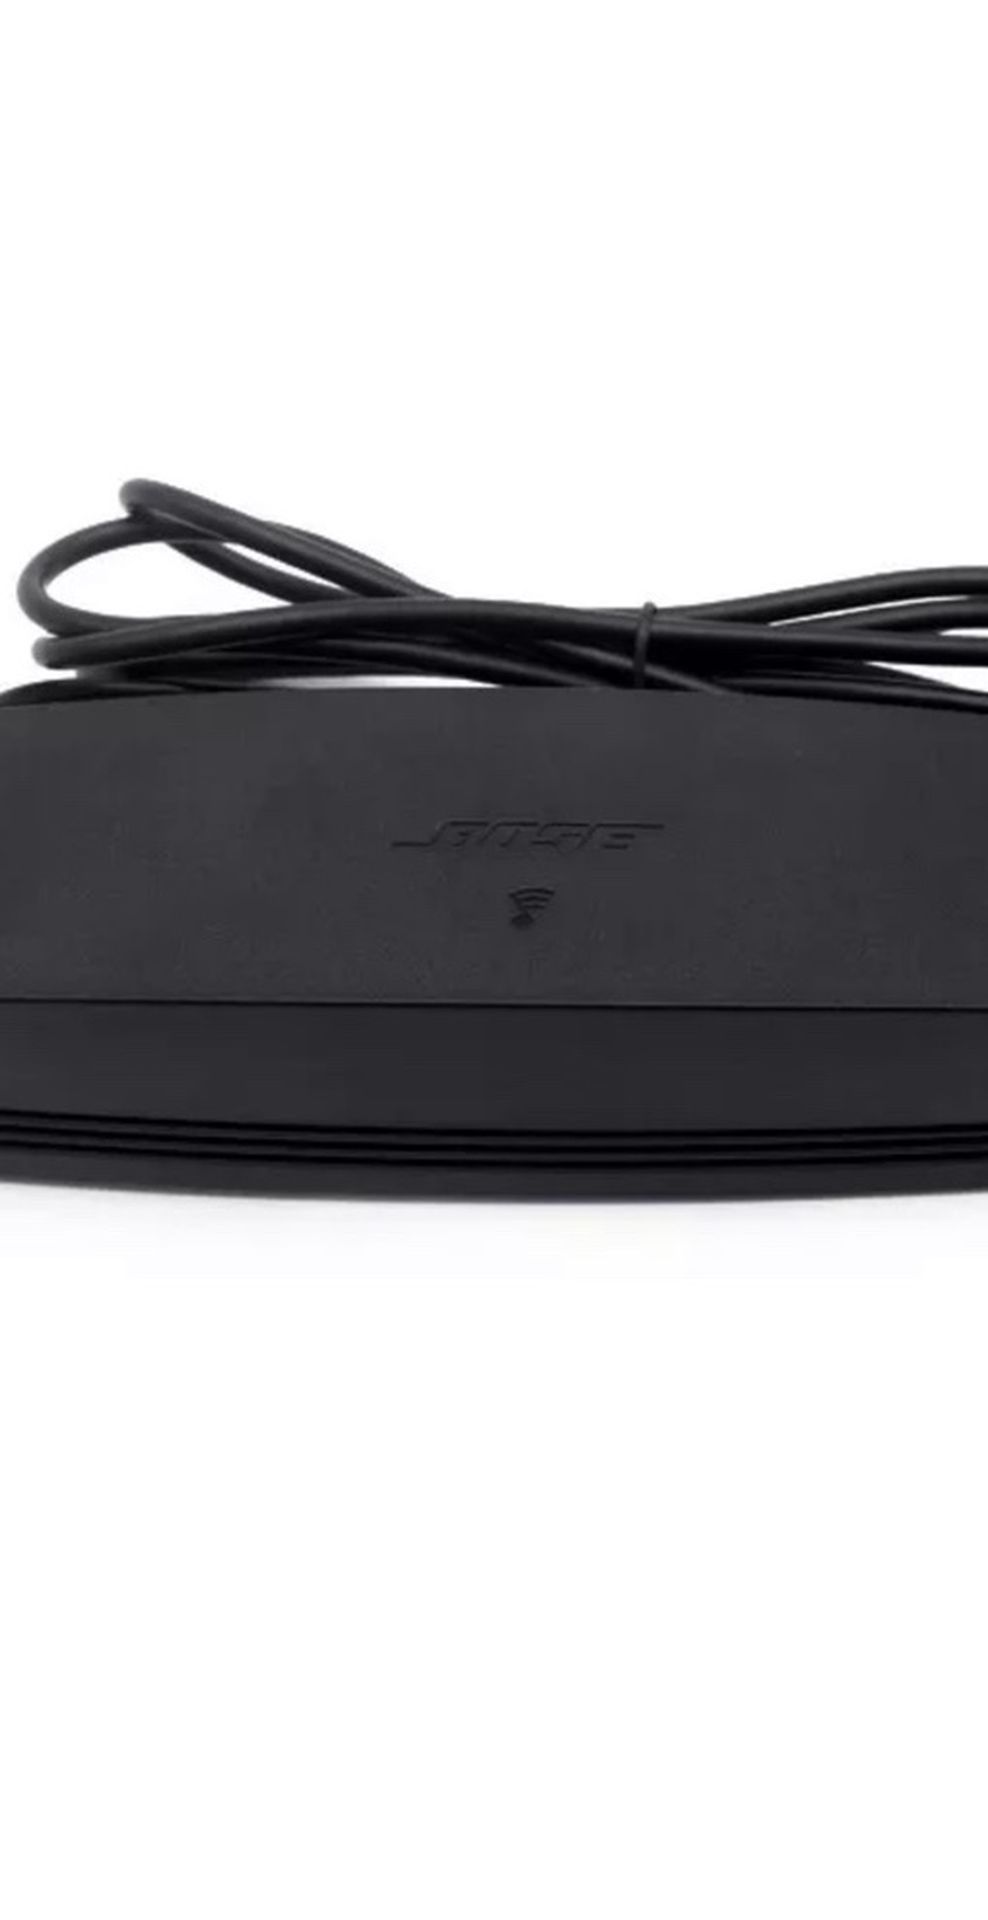 Bose-SoundTouch Wireless Adapter Wi-Fi 412451 For Lifestyle Systems Original